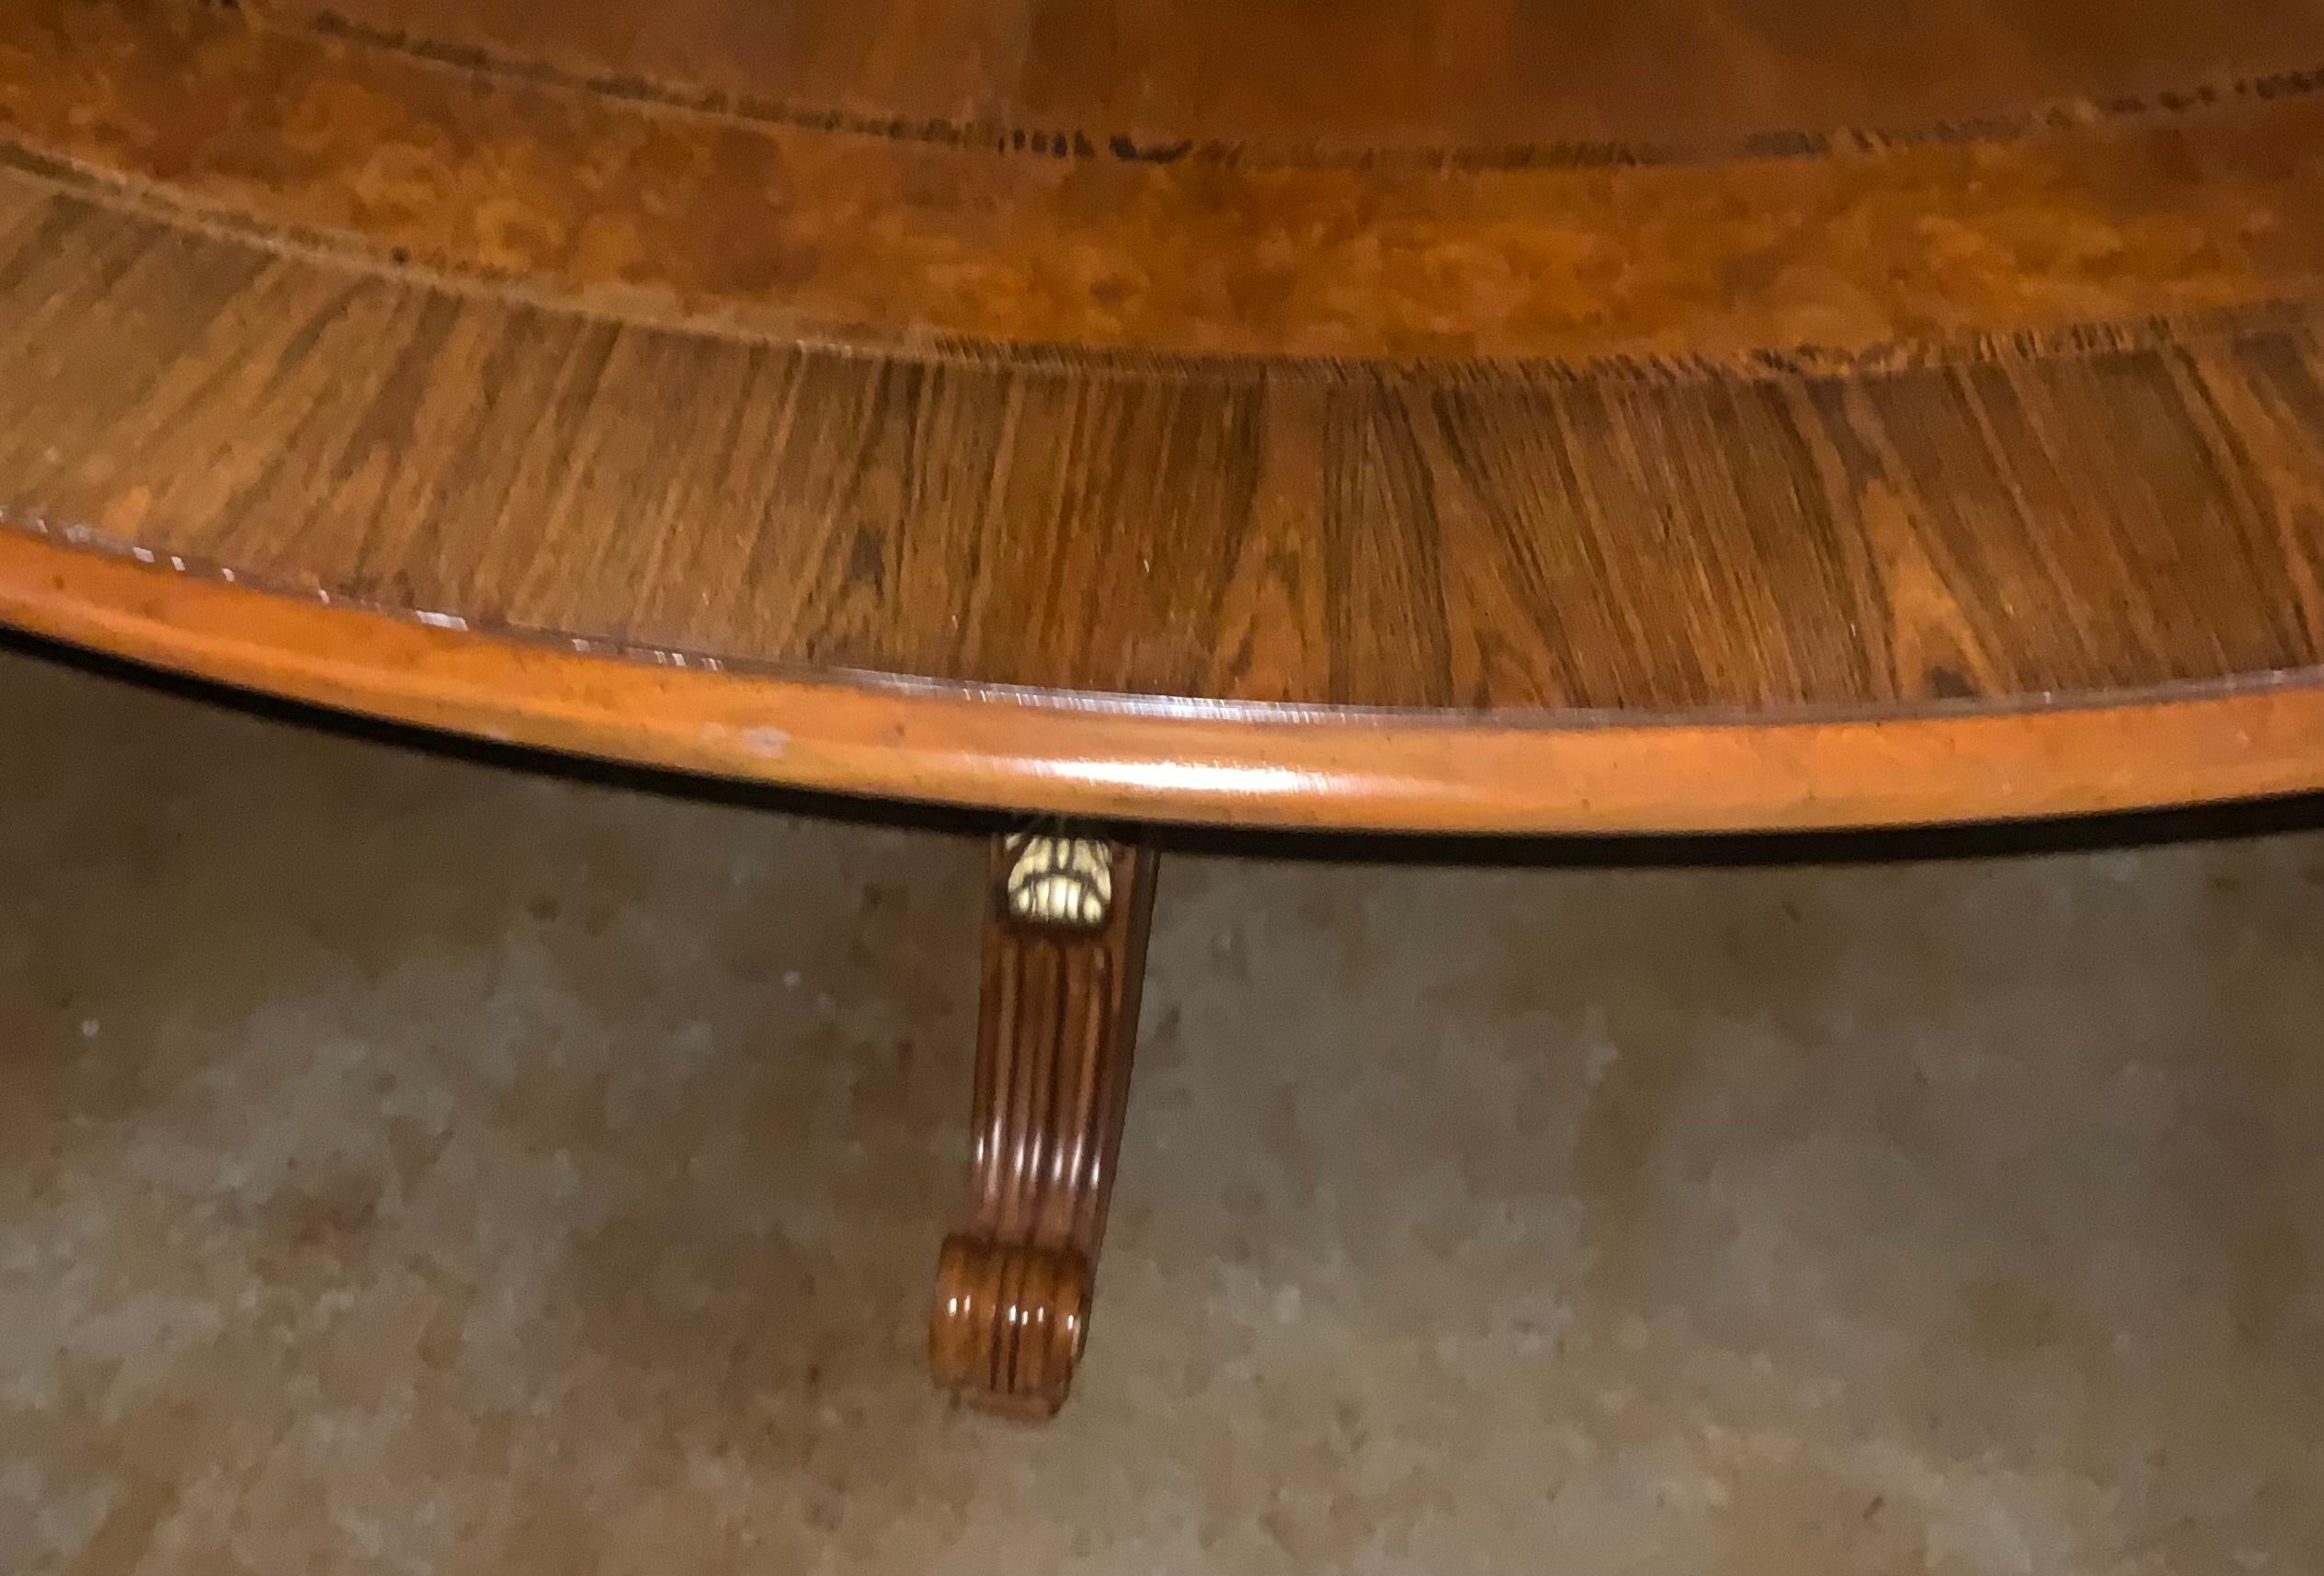 This table is 83.5” in diameter so it will seat up to ten people
Comfortably. It is well made in walnut with inlay of rosewood.
The finish has been buffed to a high sheen. It has been gently
Used and is good condition. The pedestal has four